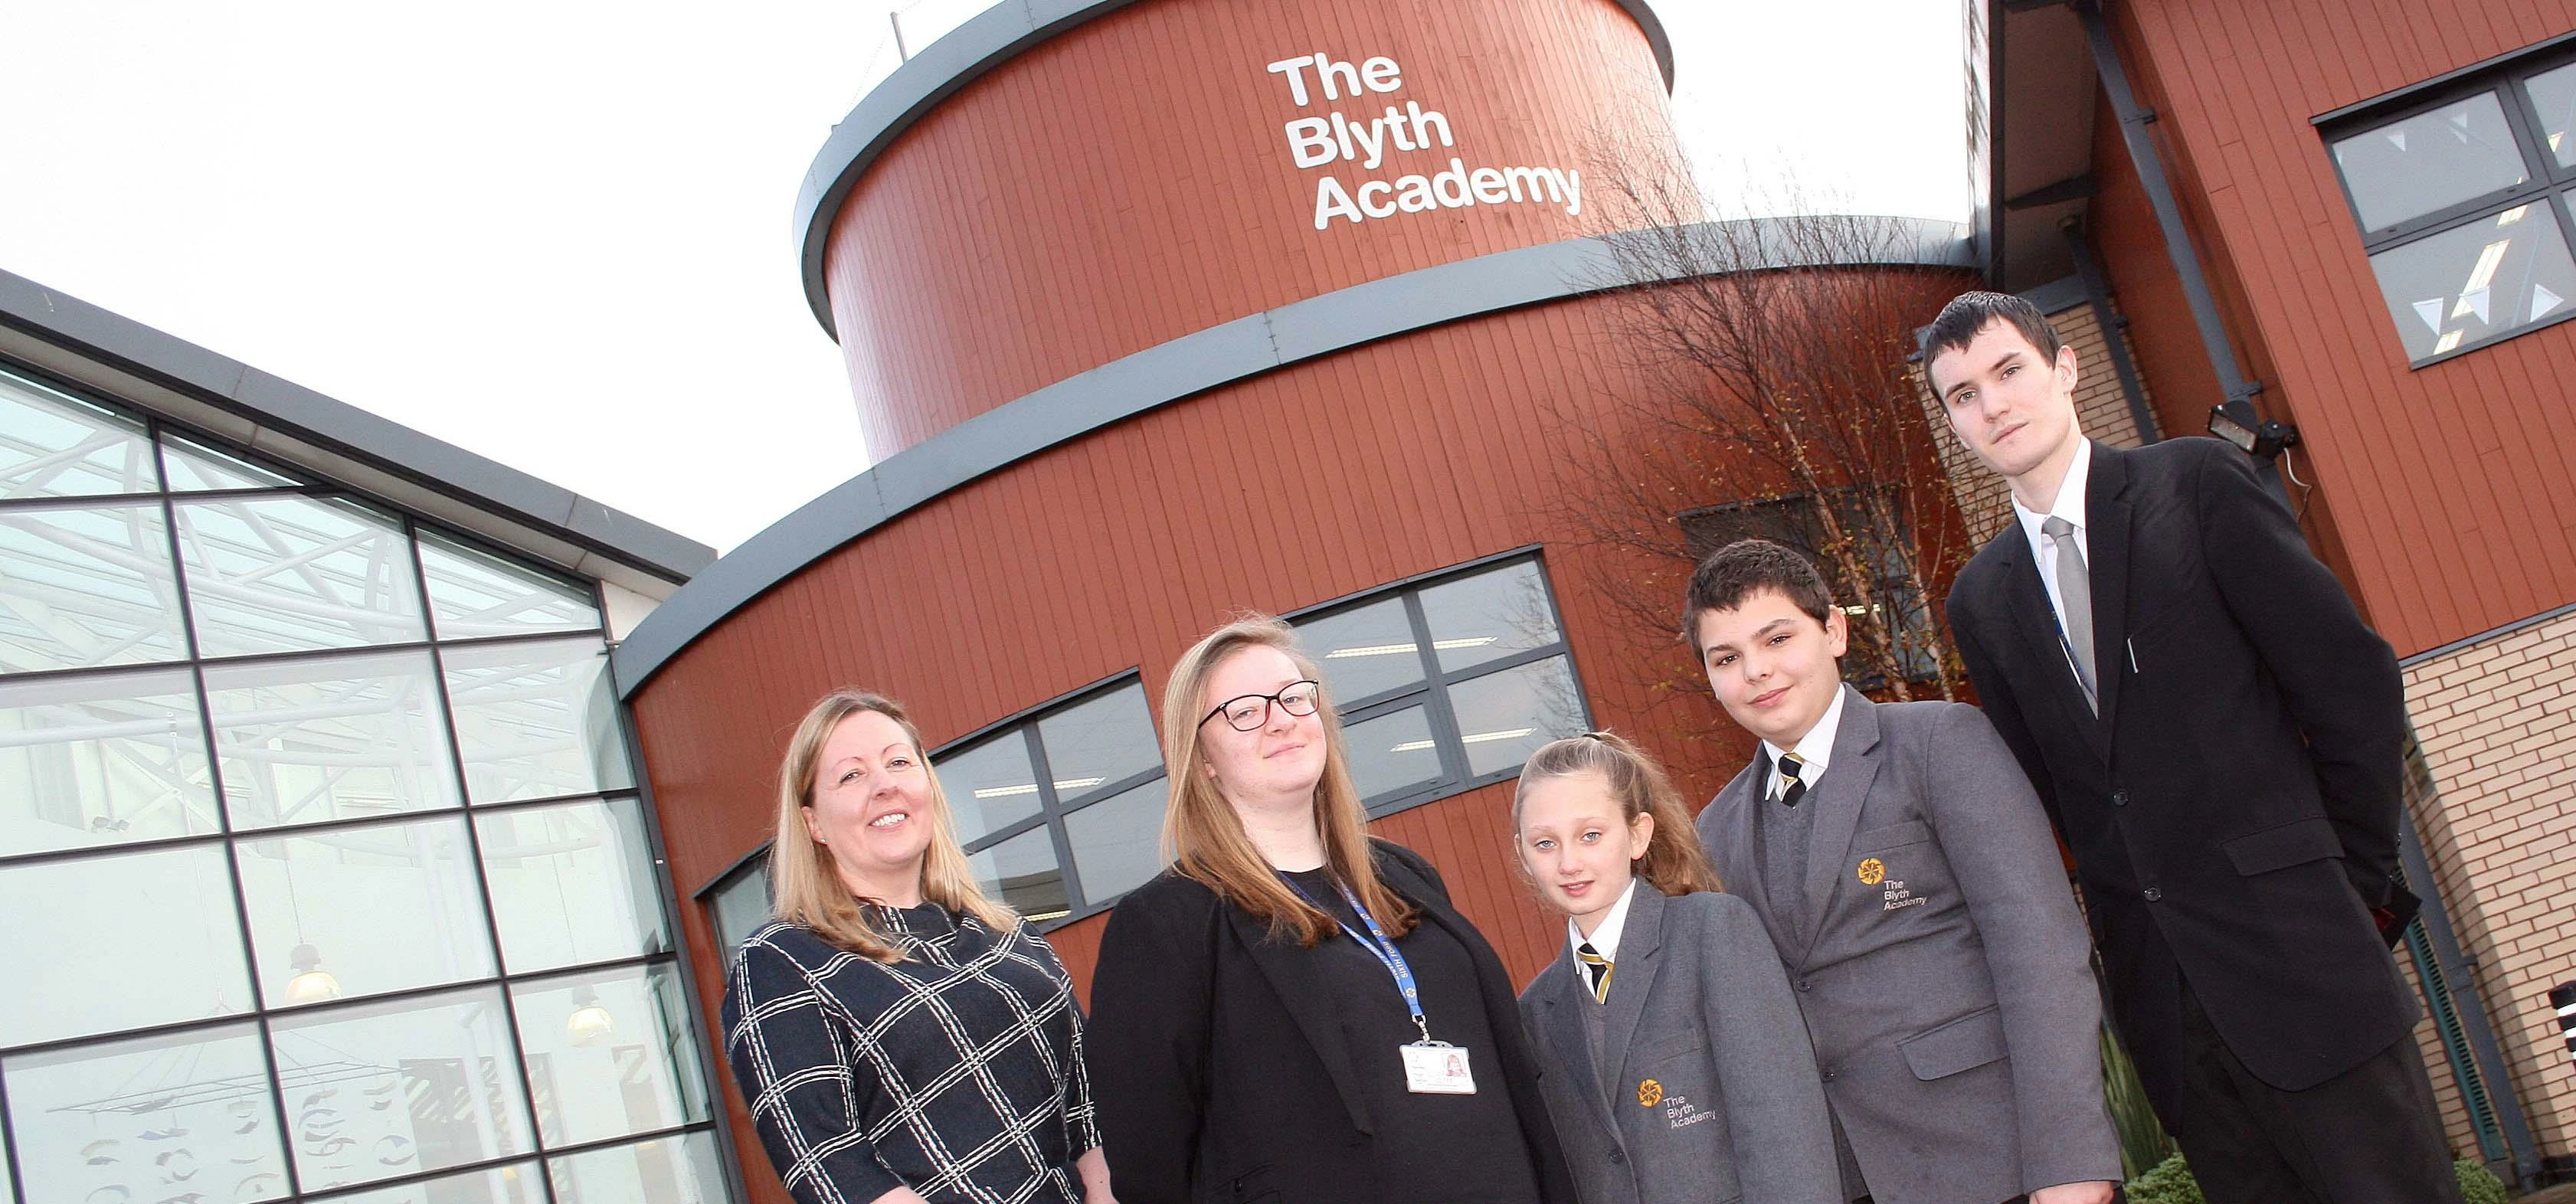 Looking forward with confidence at The Blyth Academy.  